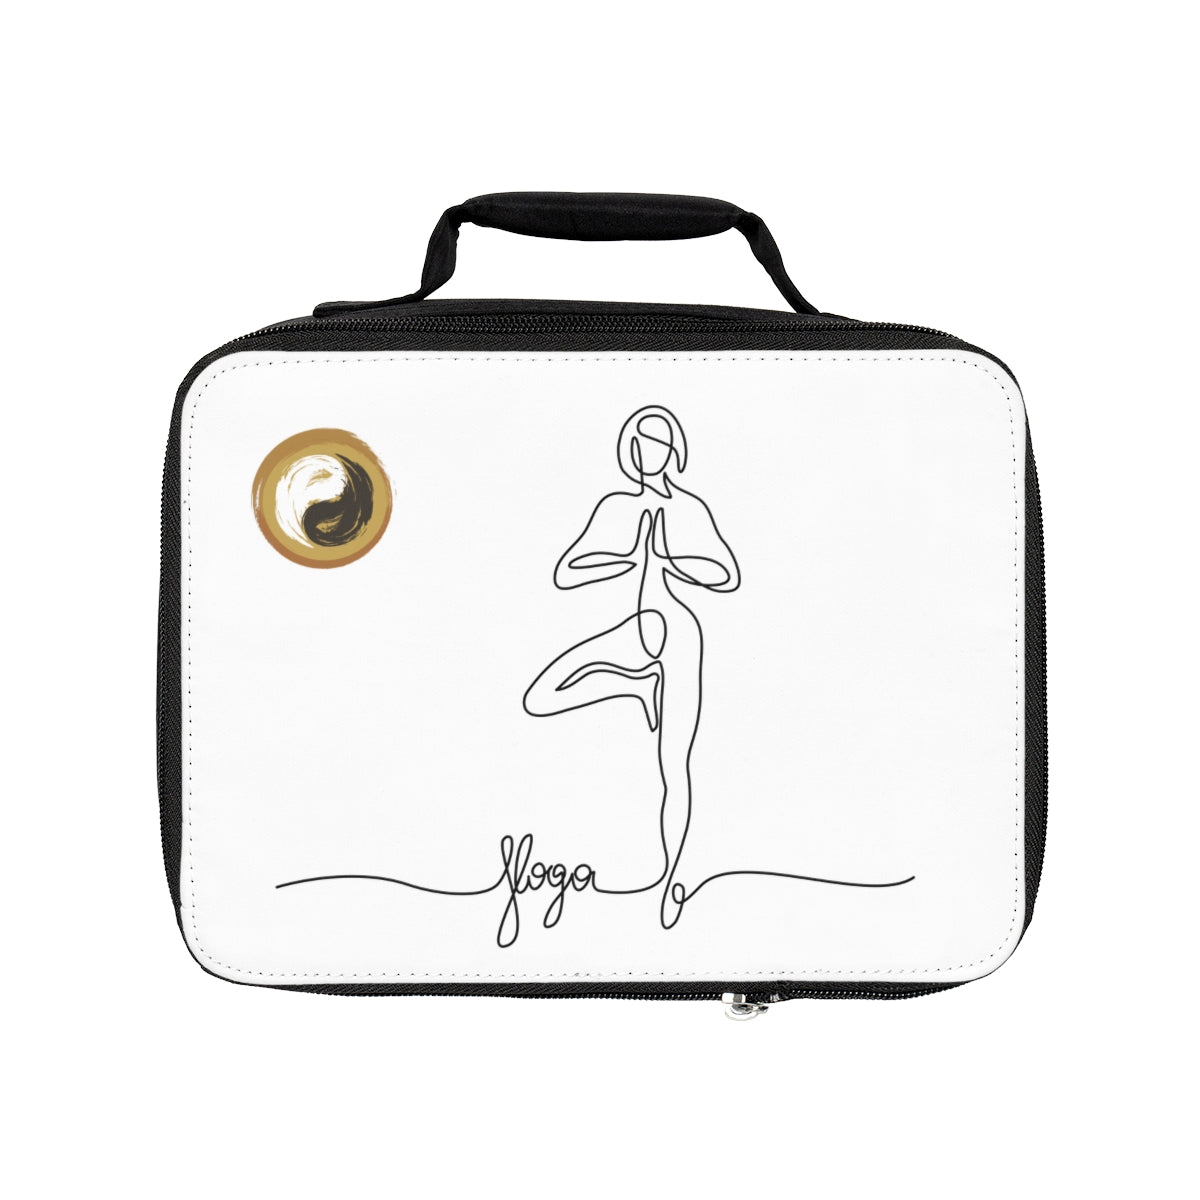 Personal Hour Style Lunch Bag - Personal Hour for Yoga and Meditations 